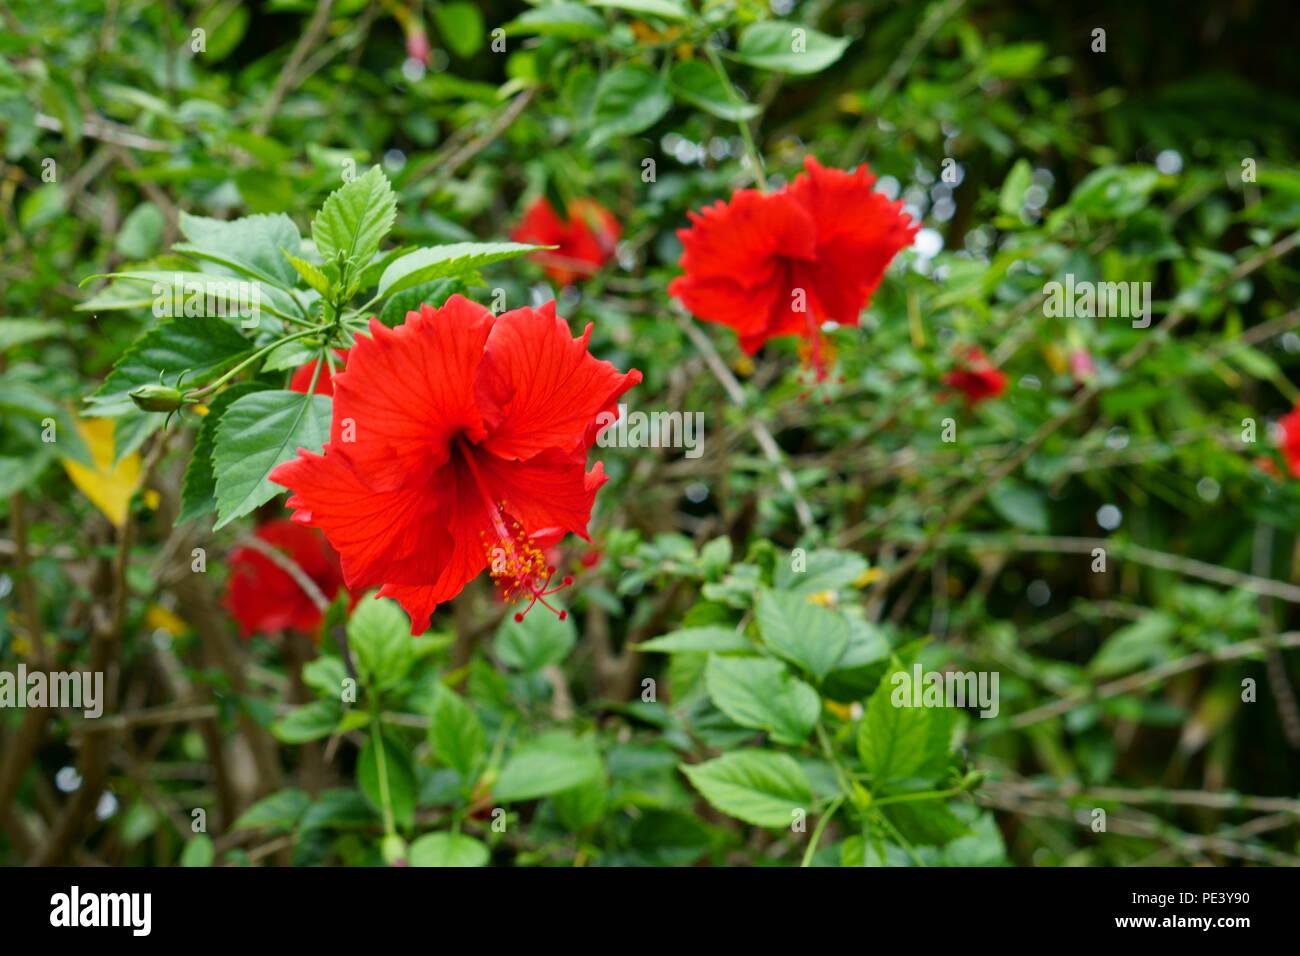 Hibiscus flower with the plant Stock Photo